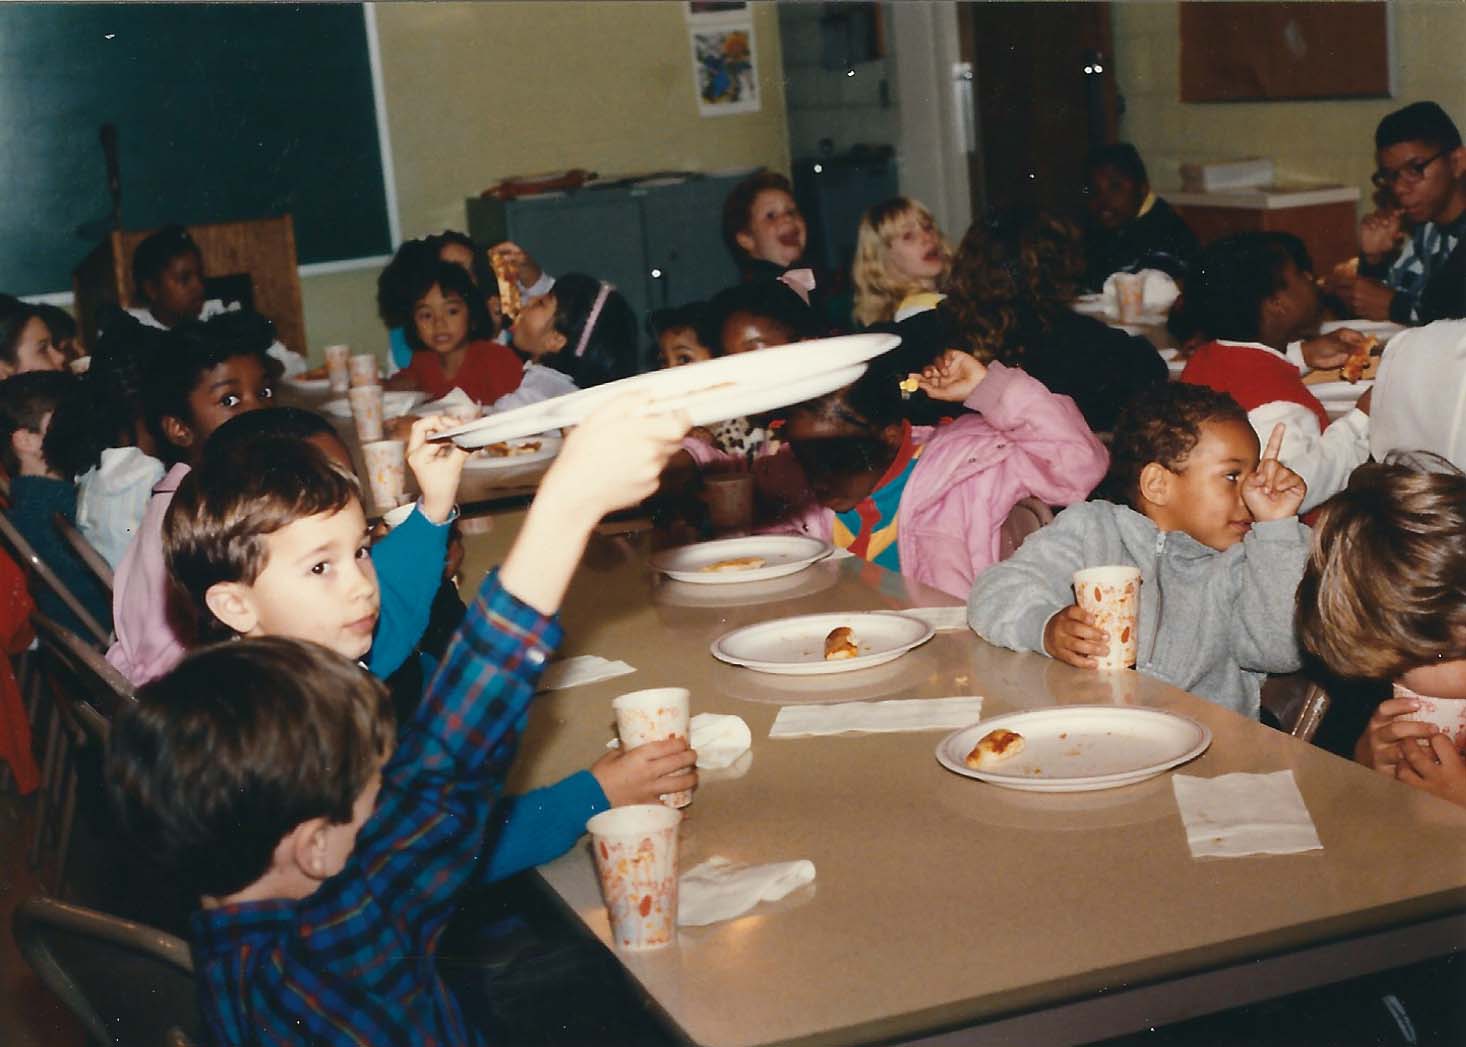 Pizza Sunday for the kids from 1989